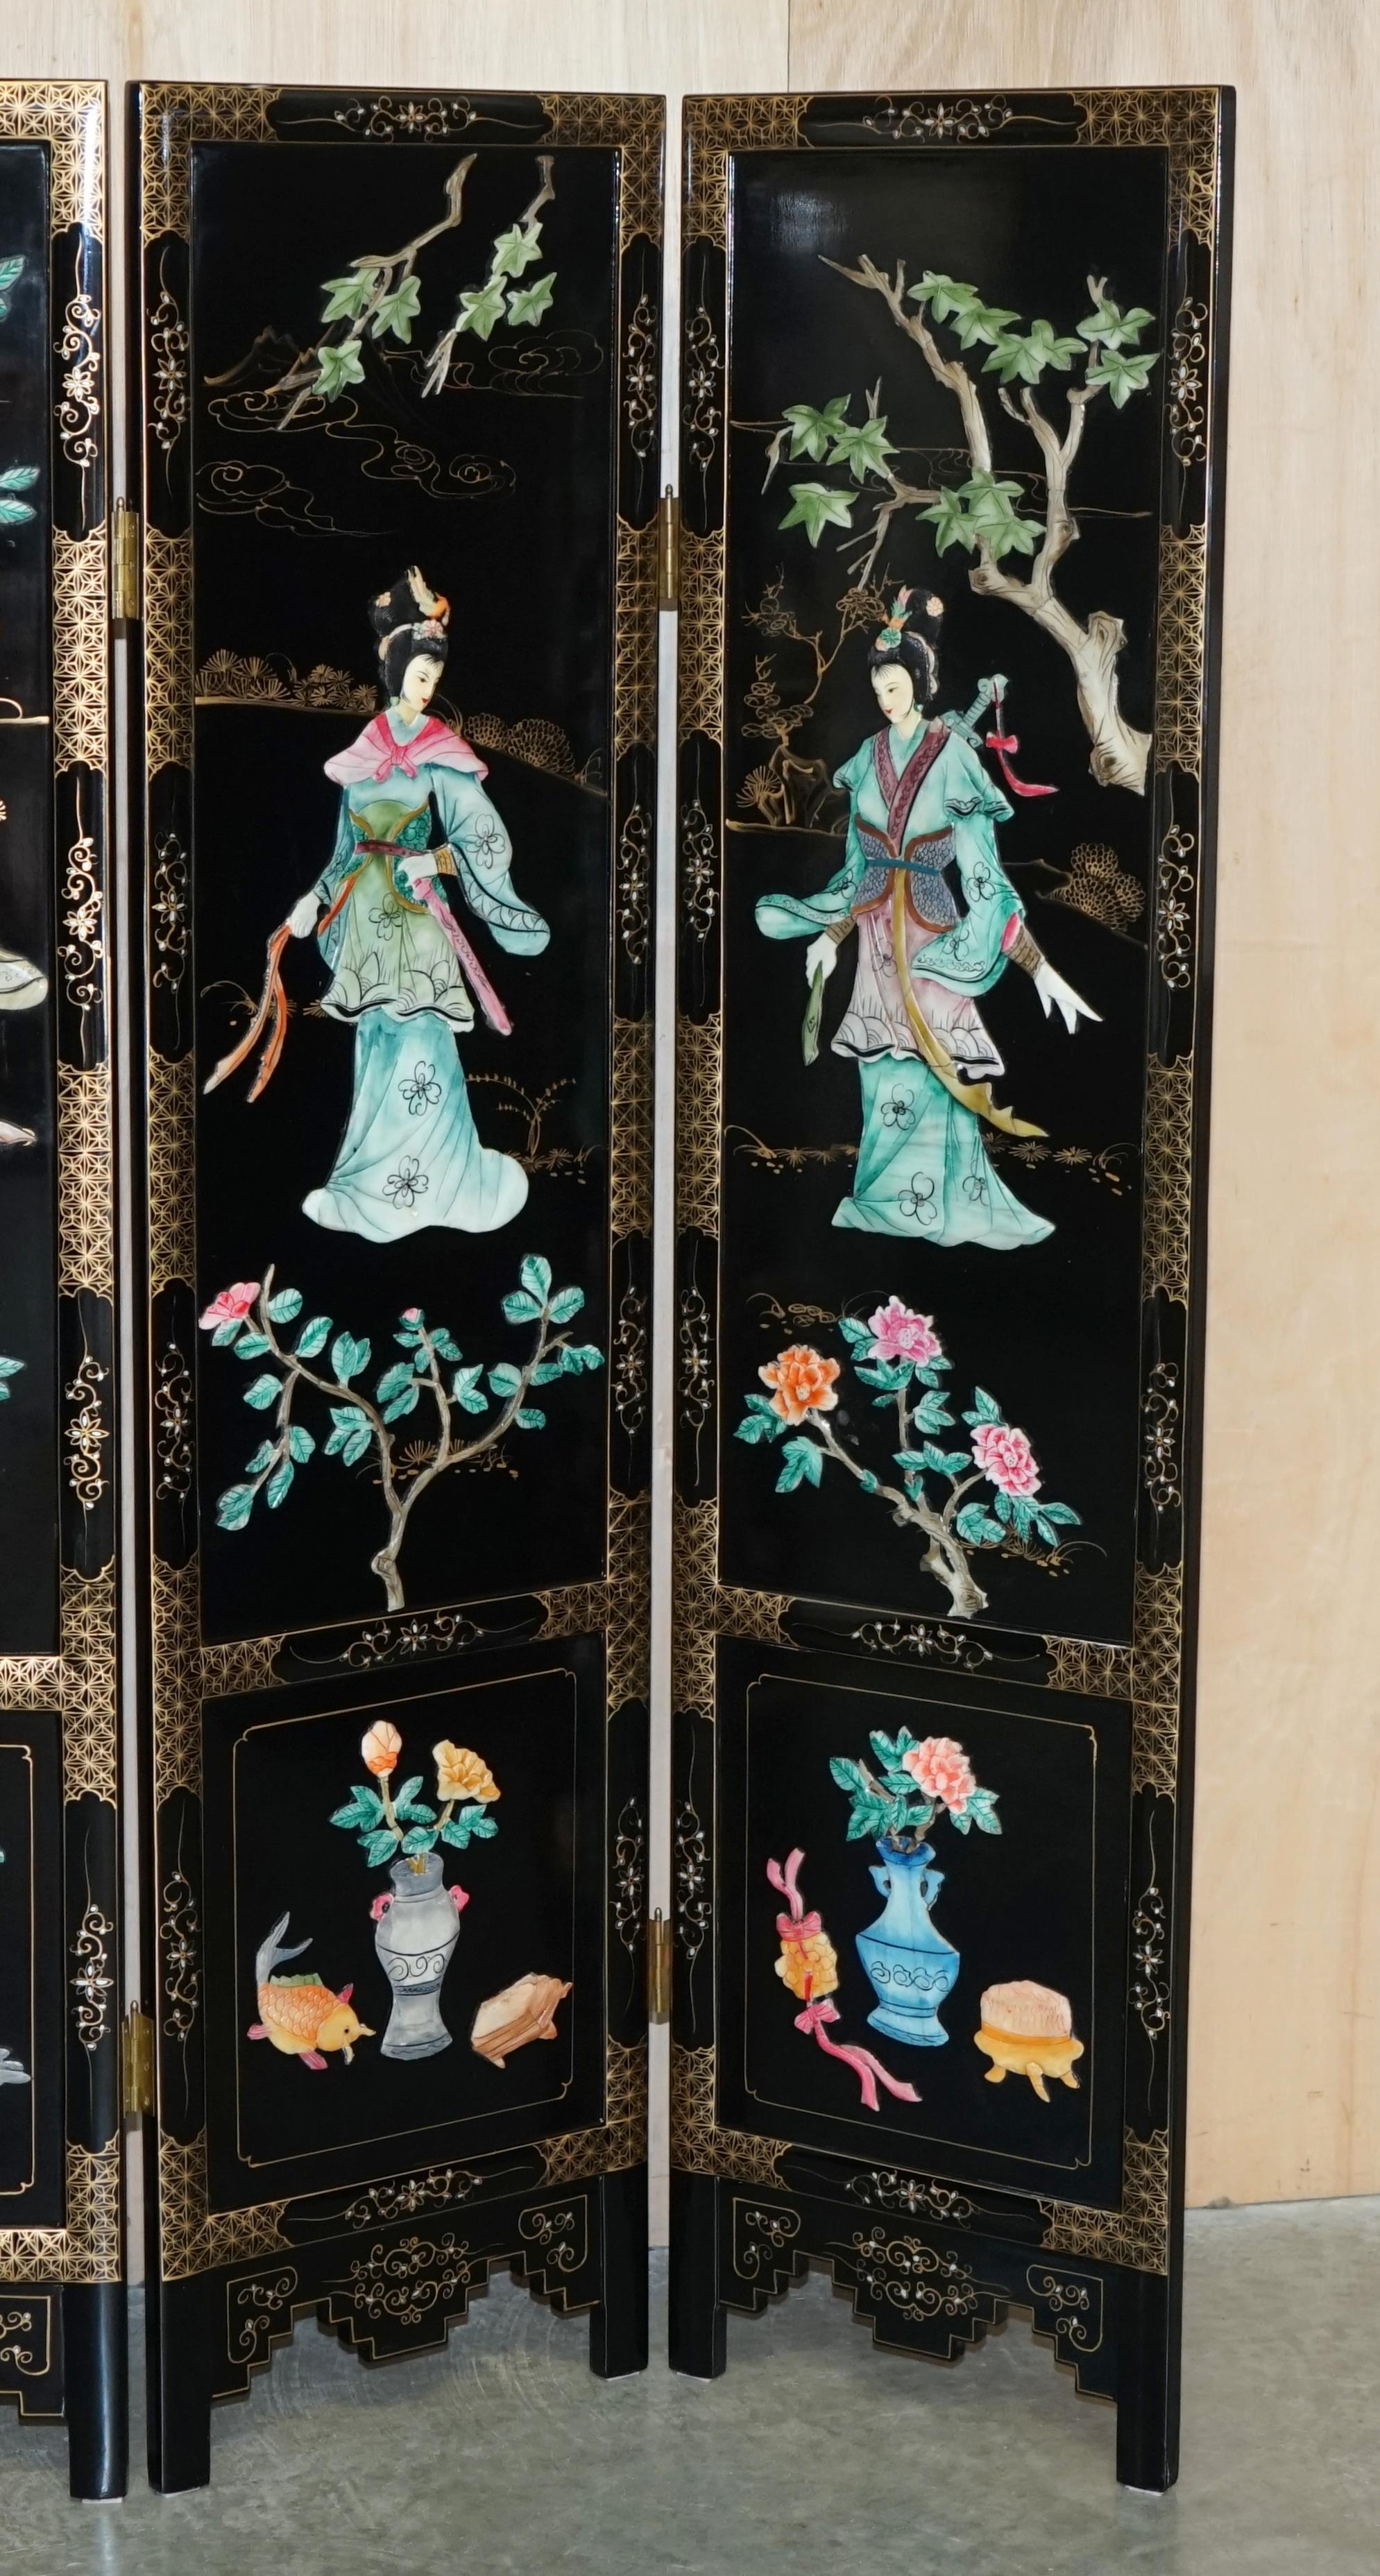 FINE & COLLECTABLE ANTiQUE CHINESE EXPORT SOAPSTONE FOLDING SCREEN ROOM DIVIDER For Sale 4